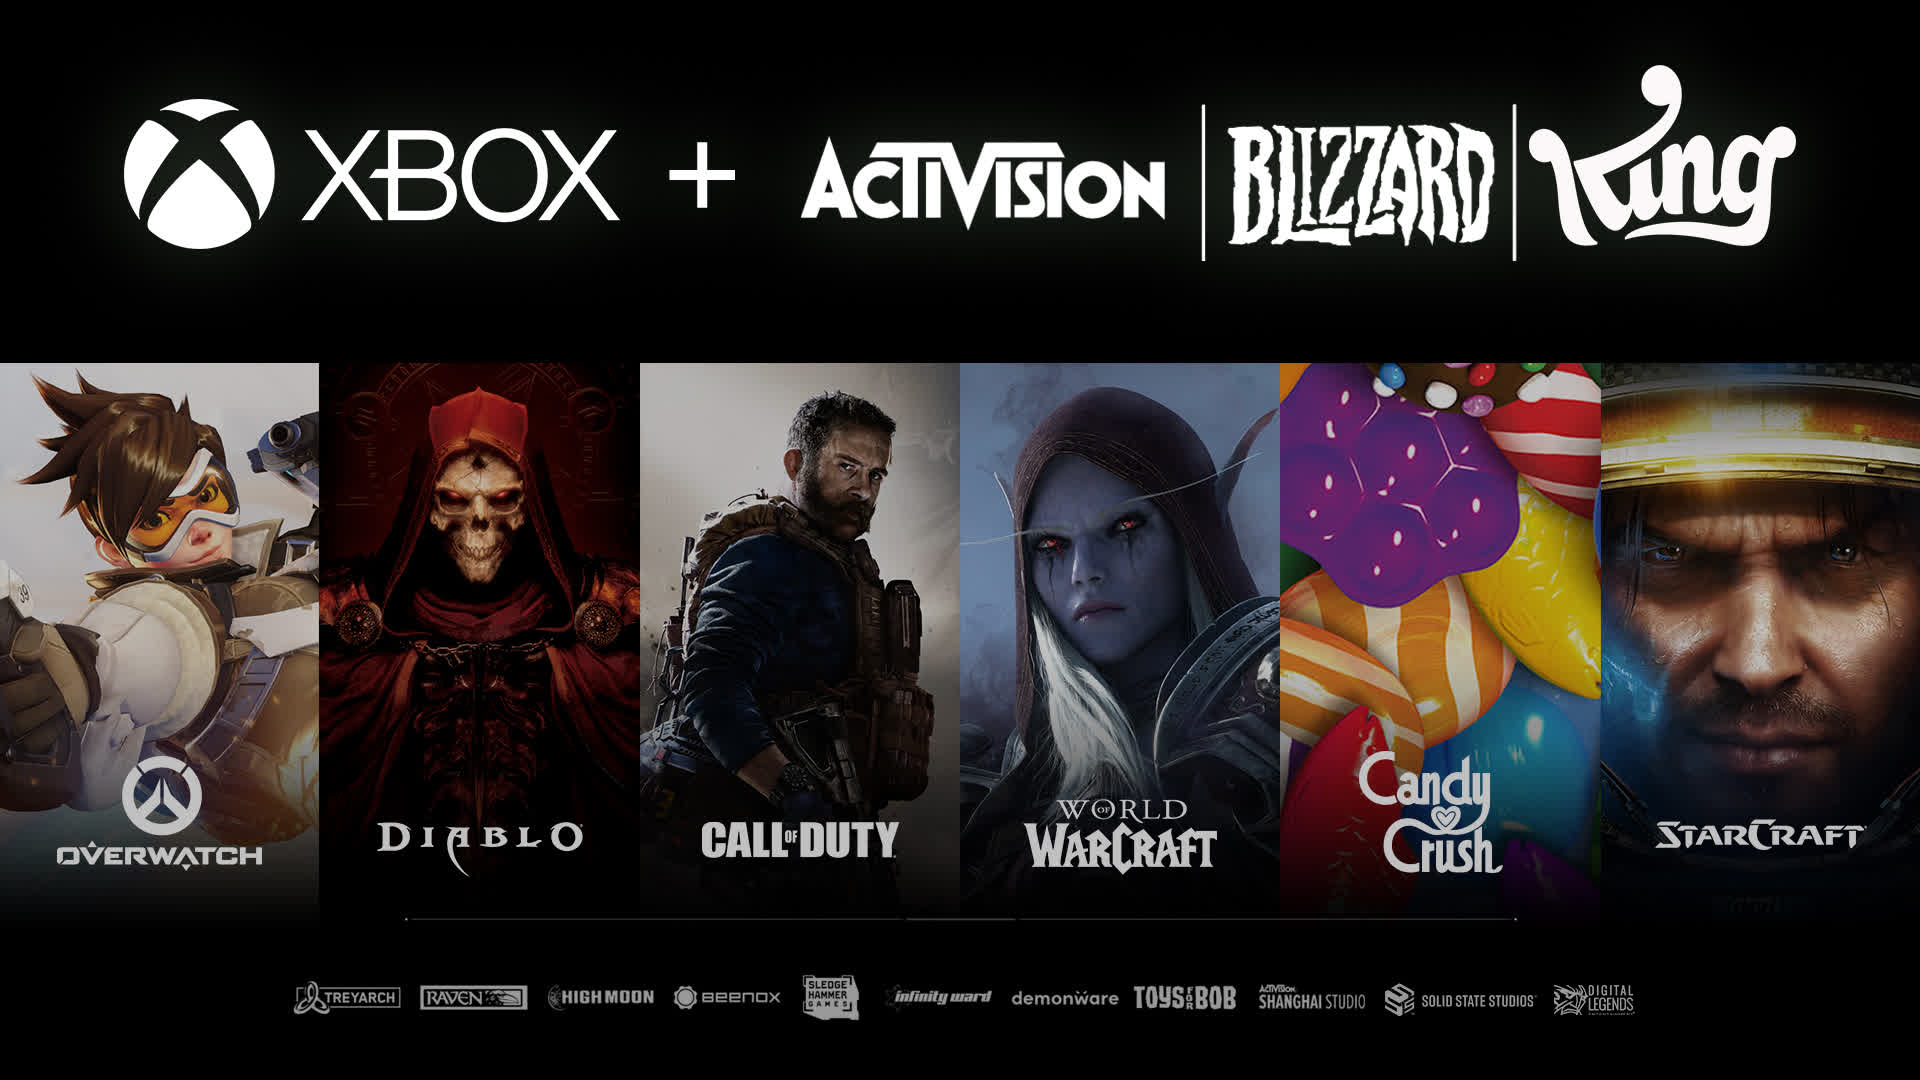 Microsoft started acquisition talks with Activision Blizzard 3 days after harassment allegations surfaced